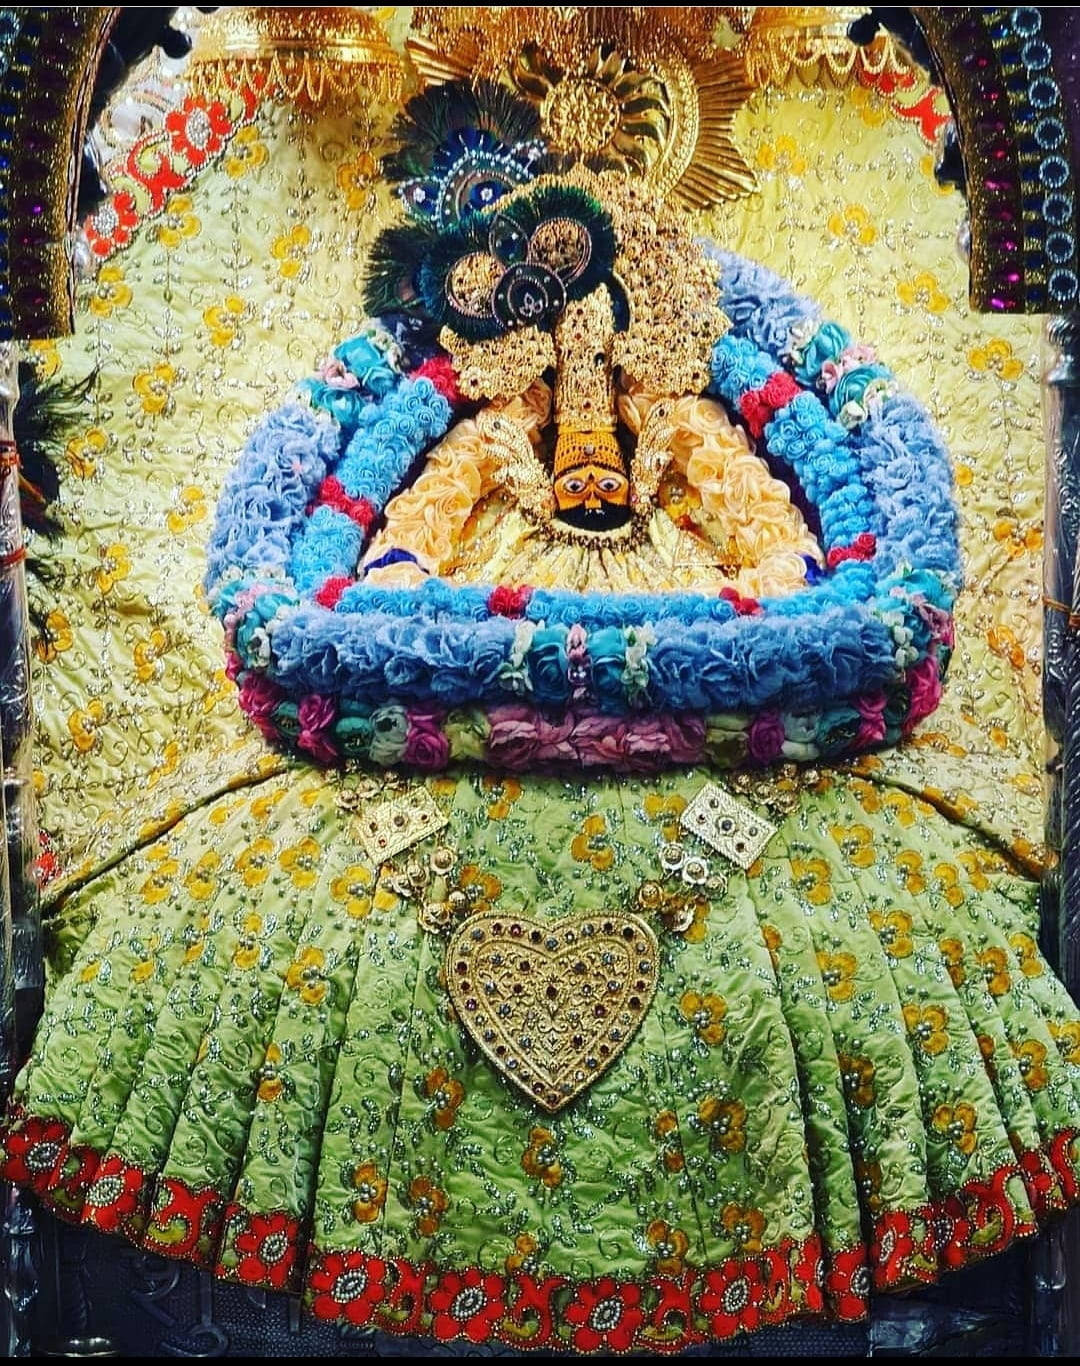 Shyam Baba With Blue Flower Garlands